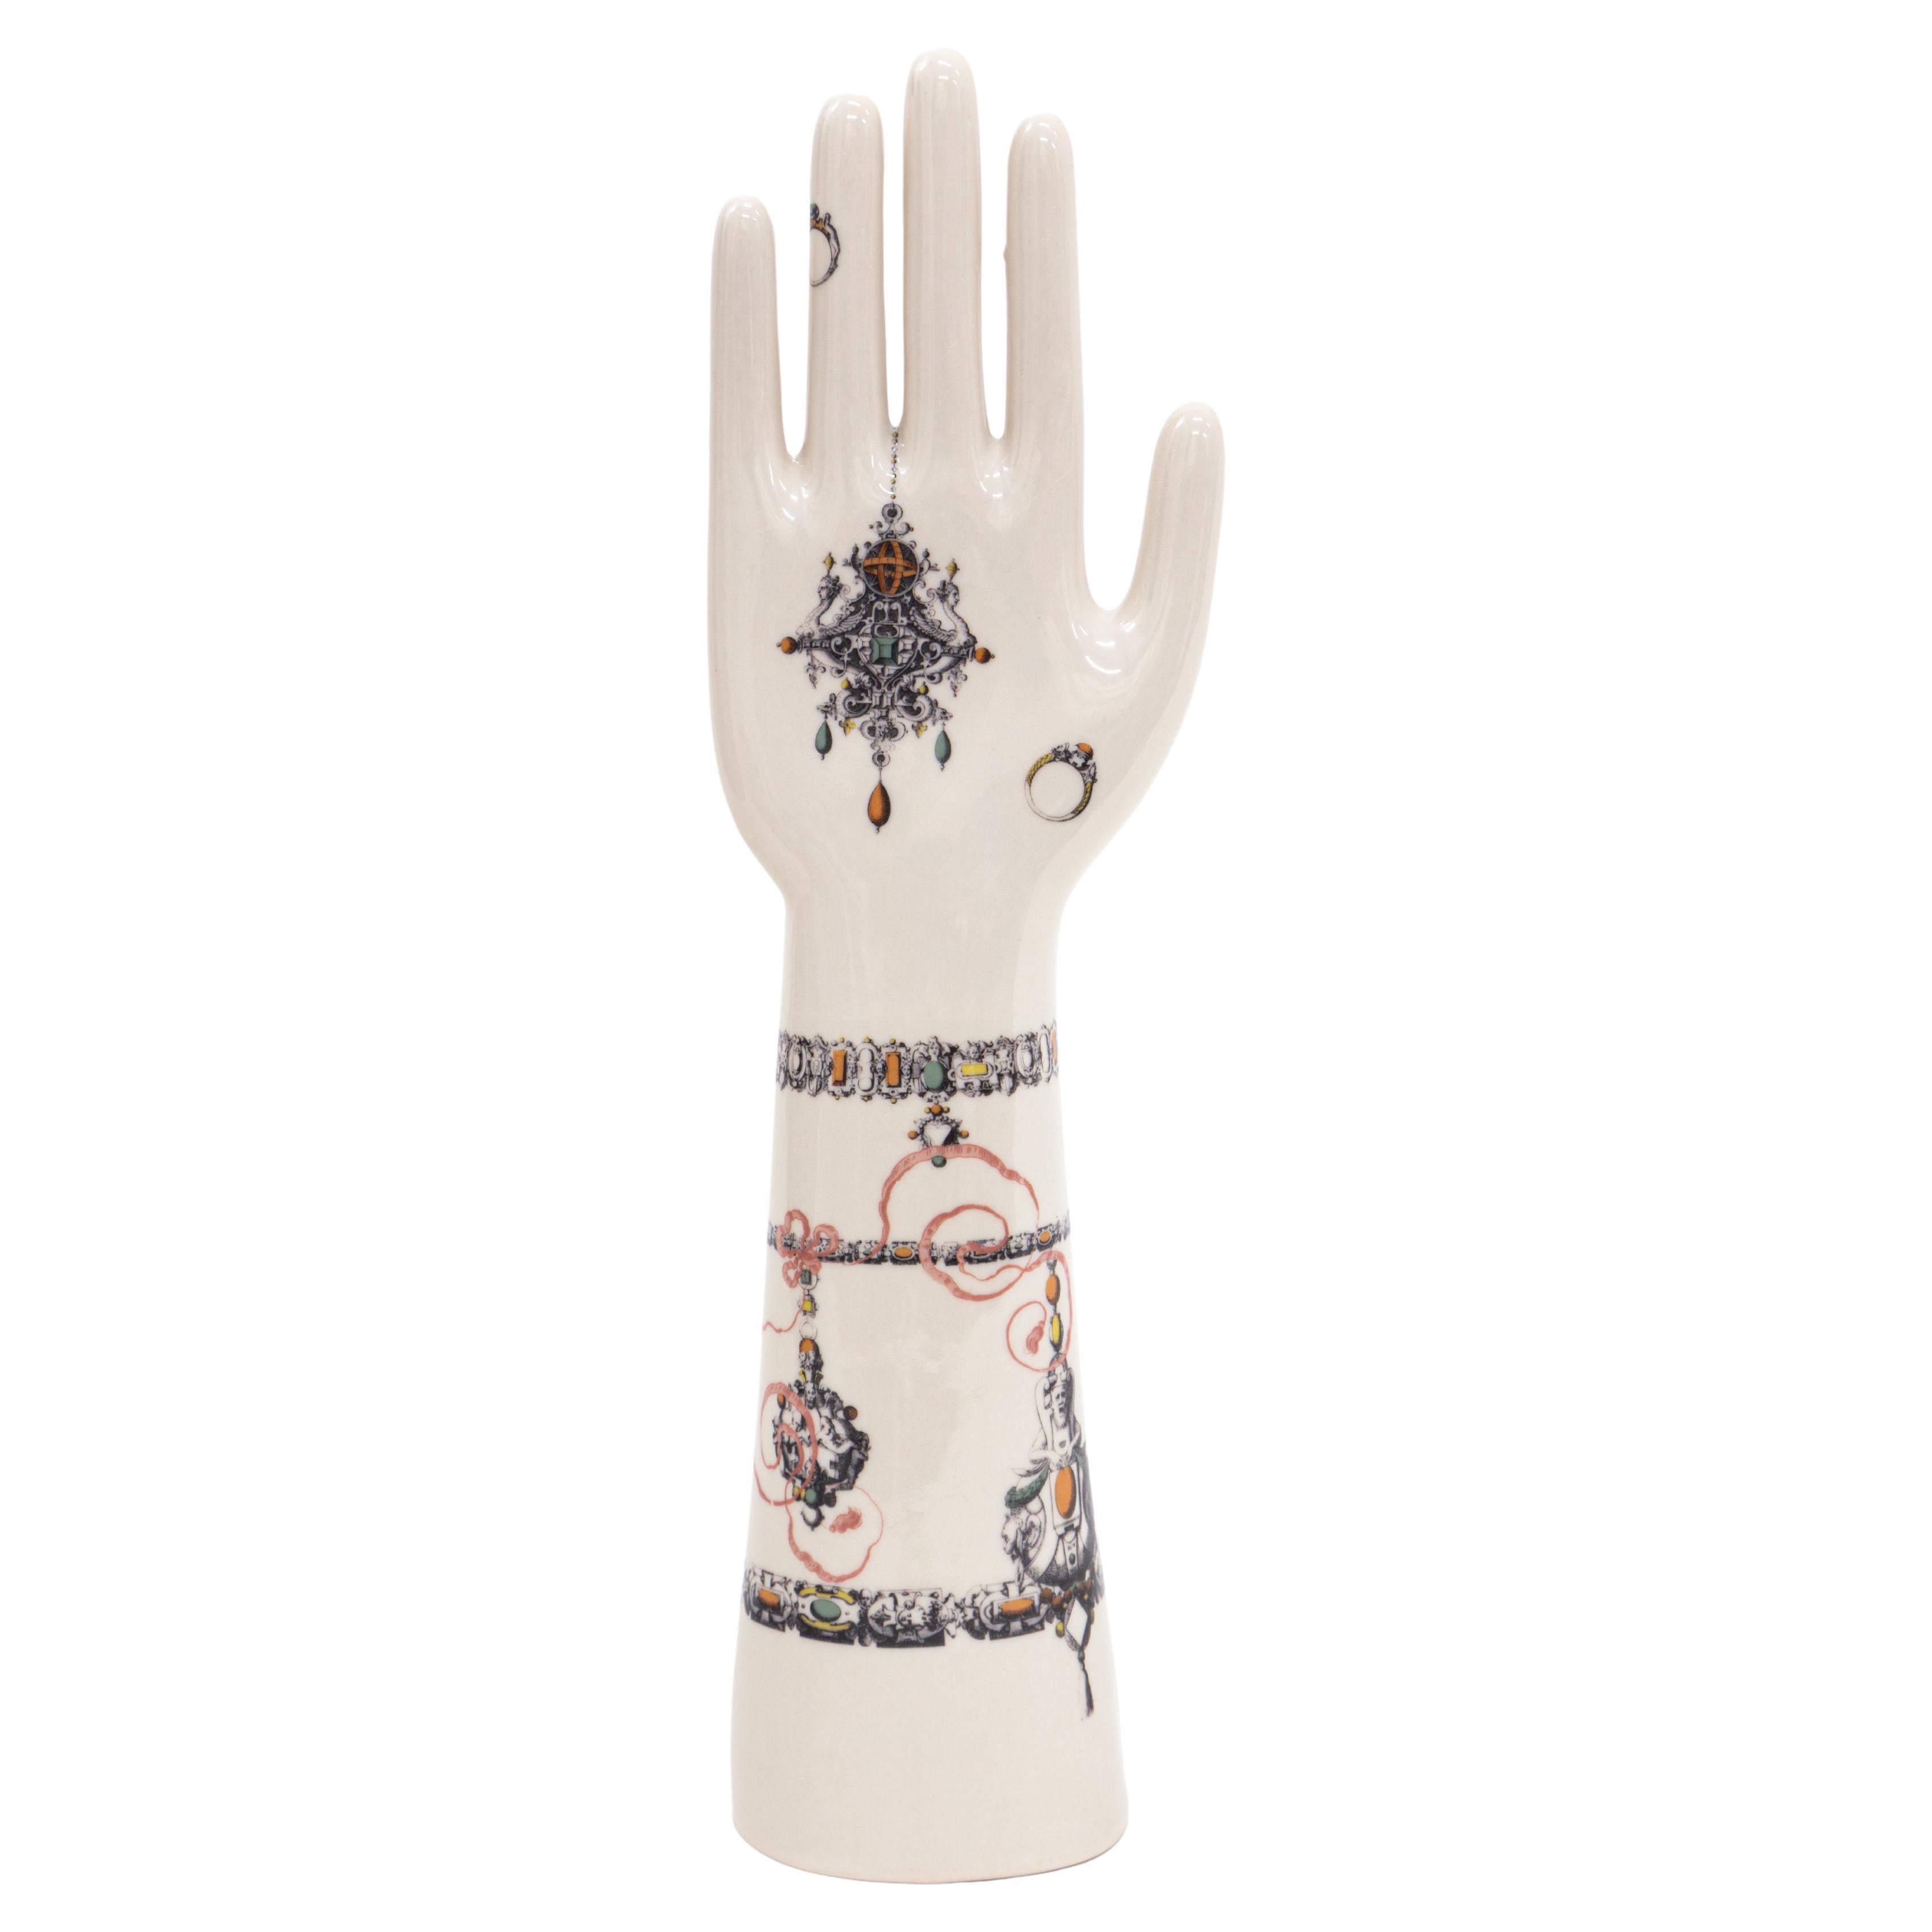 Anatomica, Porcelain Hand with Jewels Decoration by Vito Nesta